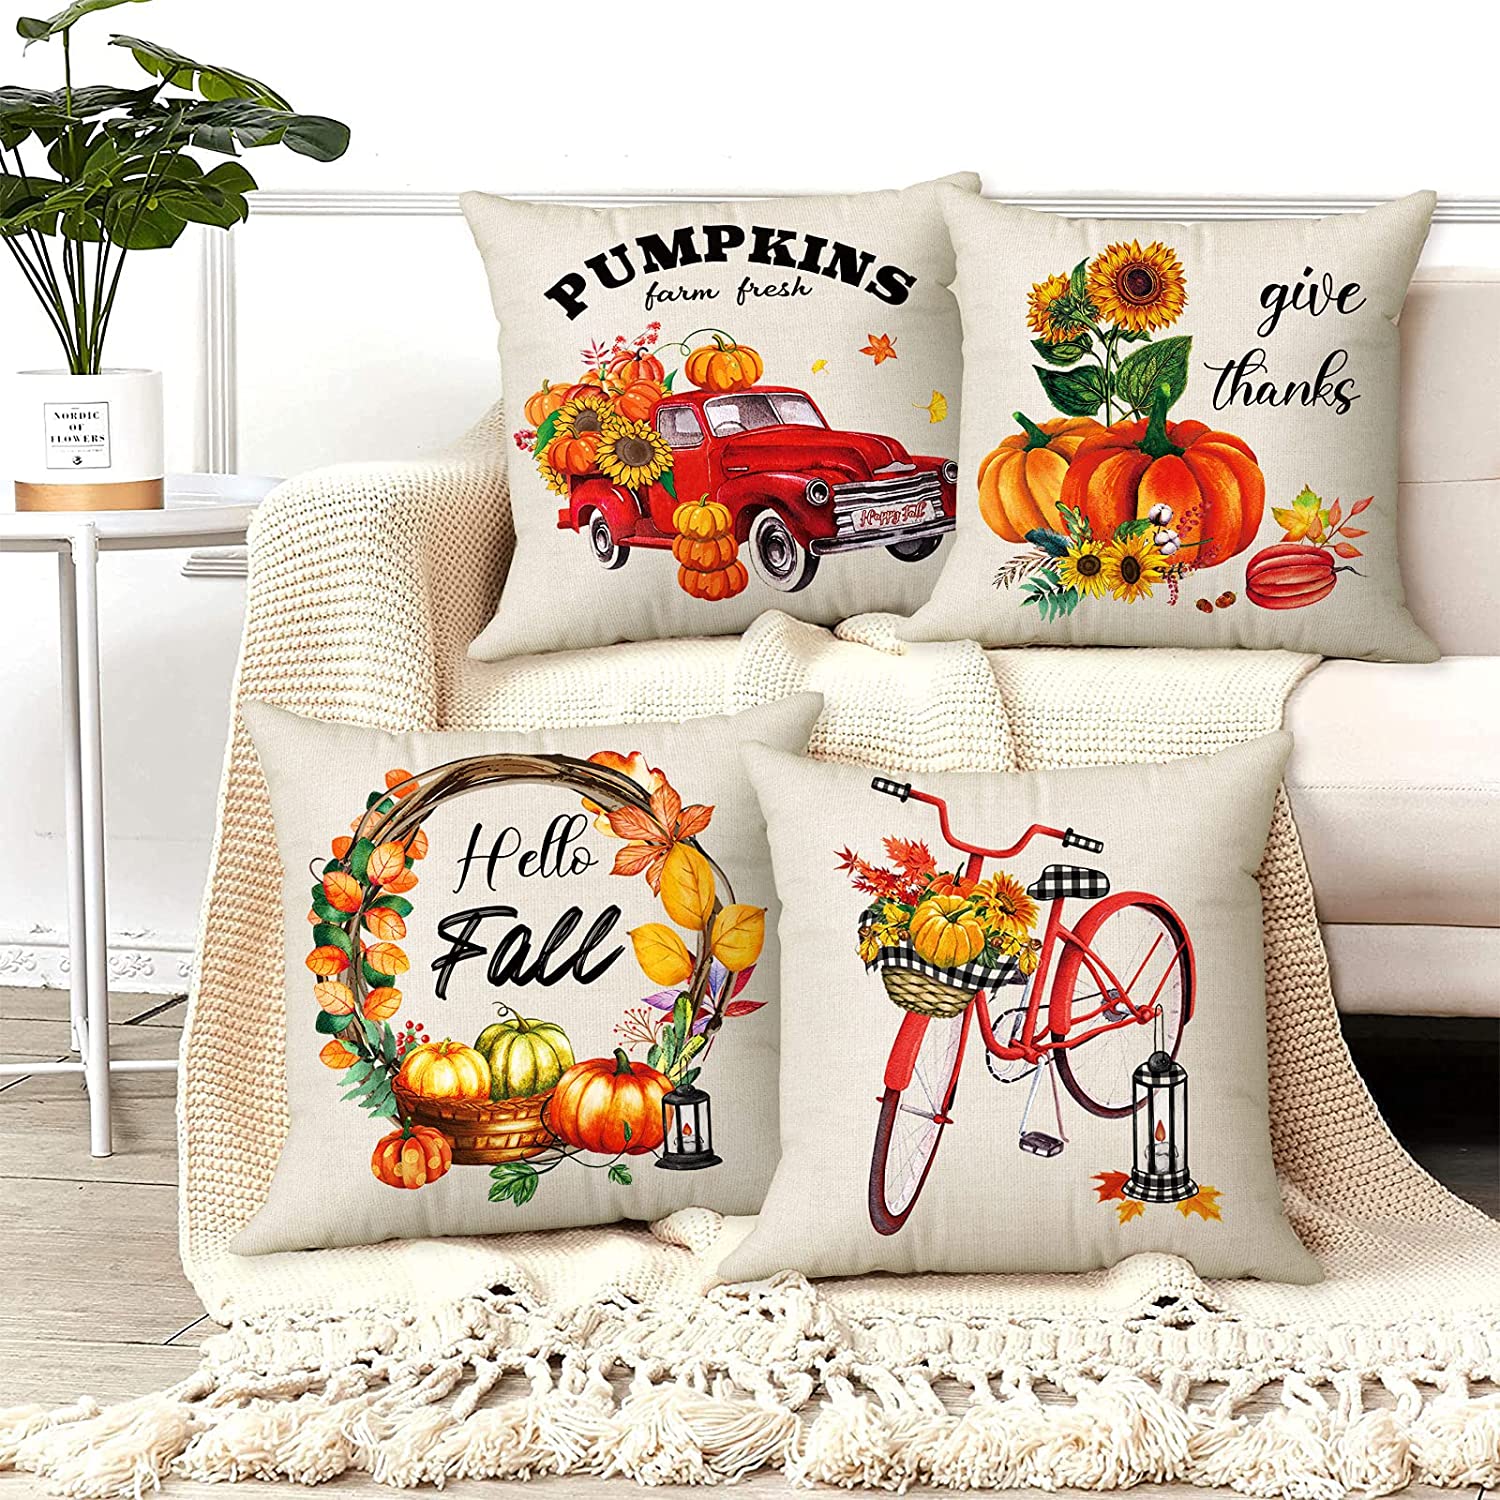 Farmhouse Fall Throw Pillow Covers 18x18 Set of 4, Autumn Pumpkin Decorative Pillow Covers, Thanksgiving Pillows Cases Harvest Cushion Cases for